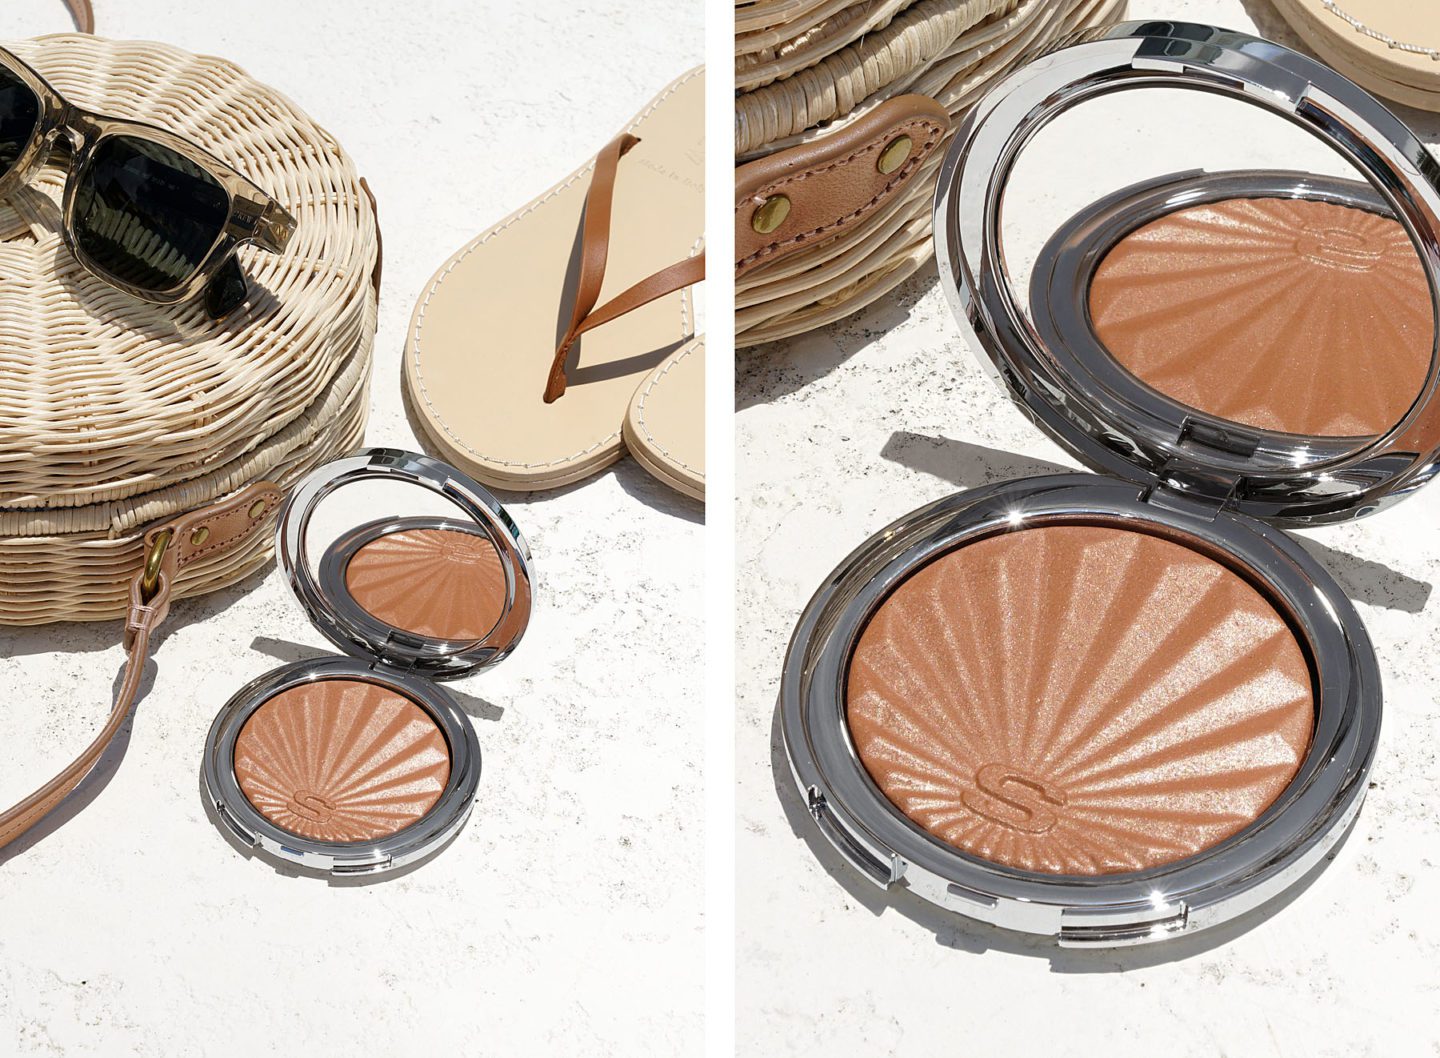 Sisley Phyto-Touche Sun Glow Bronzing Gel Powder review and swatches